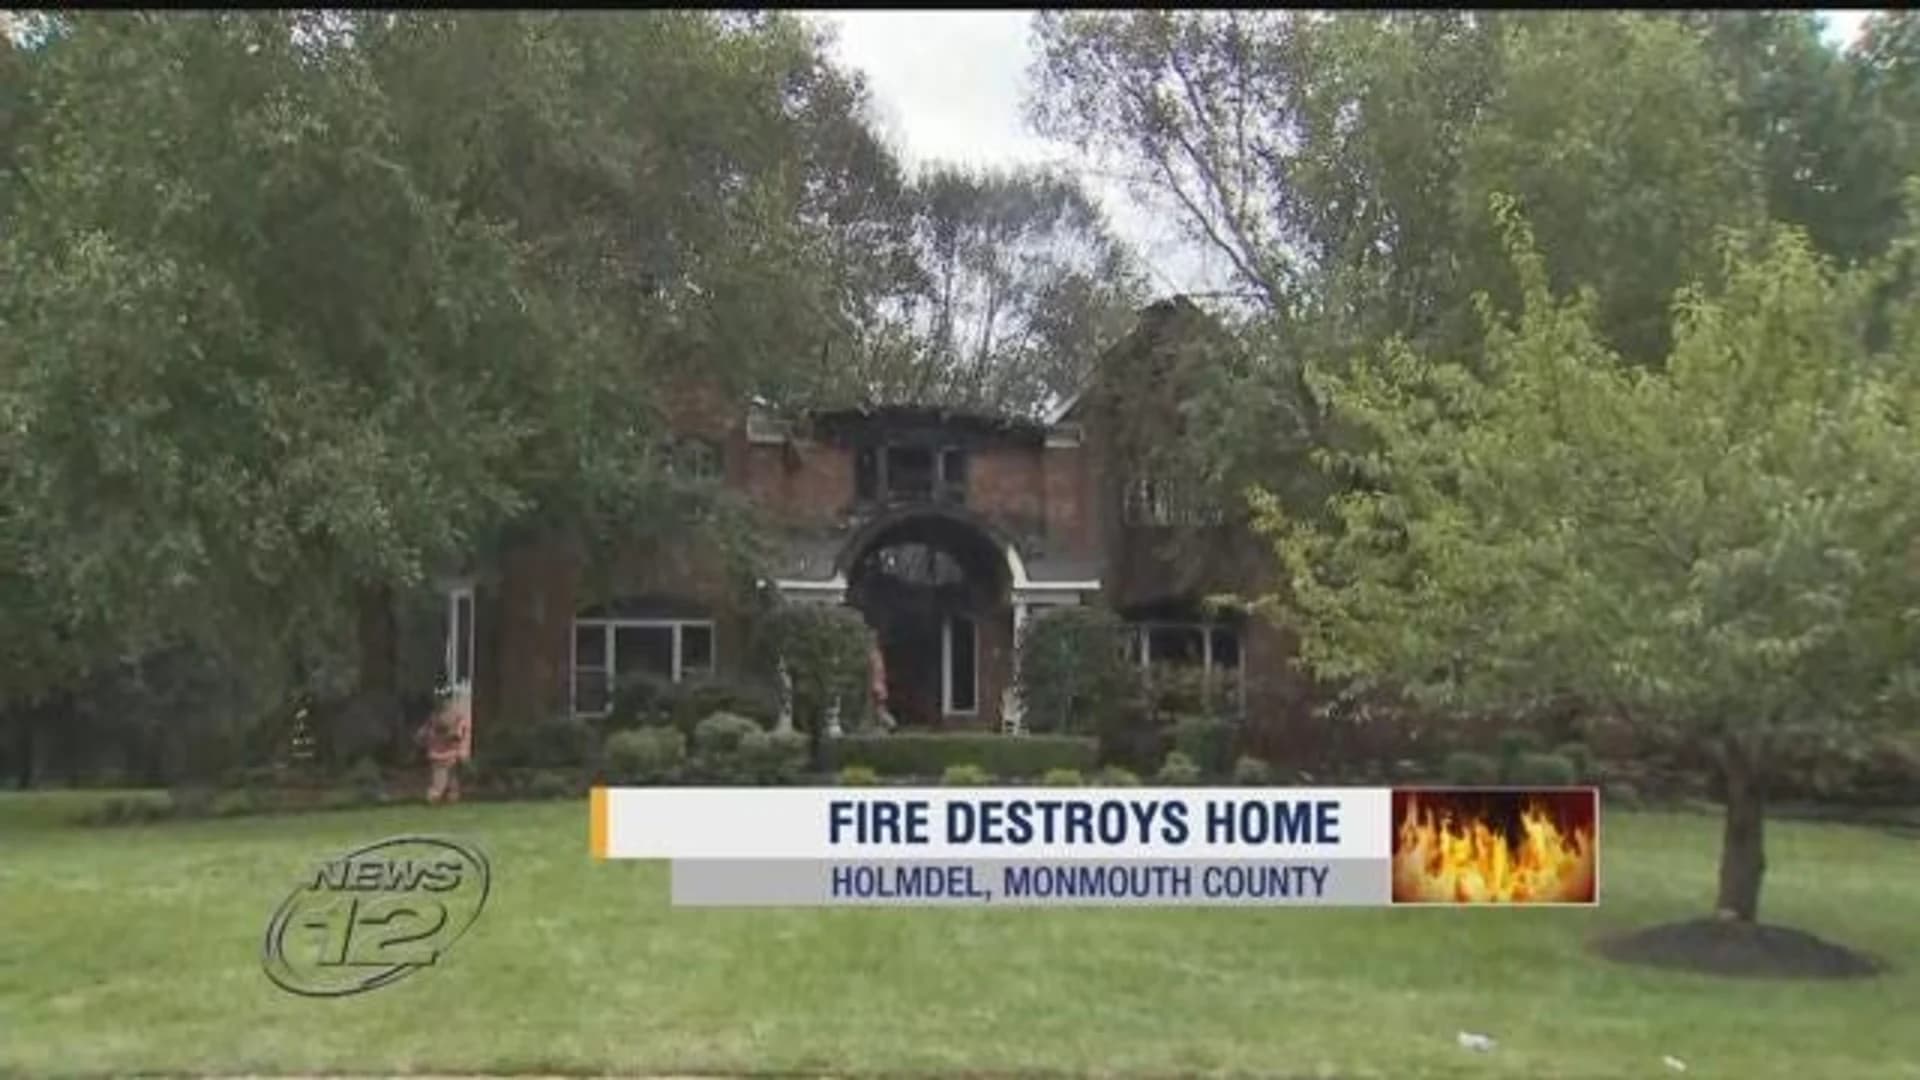 2 firefighters injured in fire that gutted Holmdel home